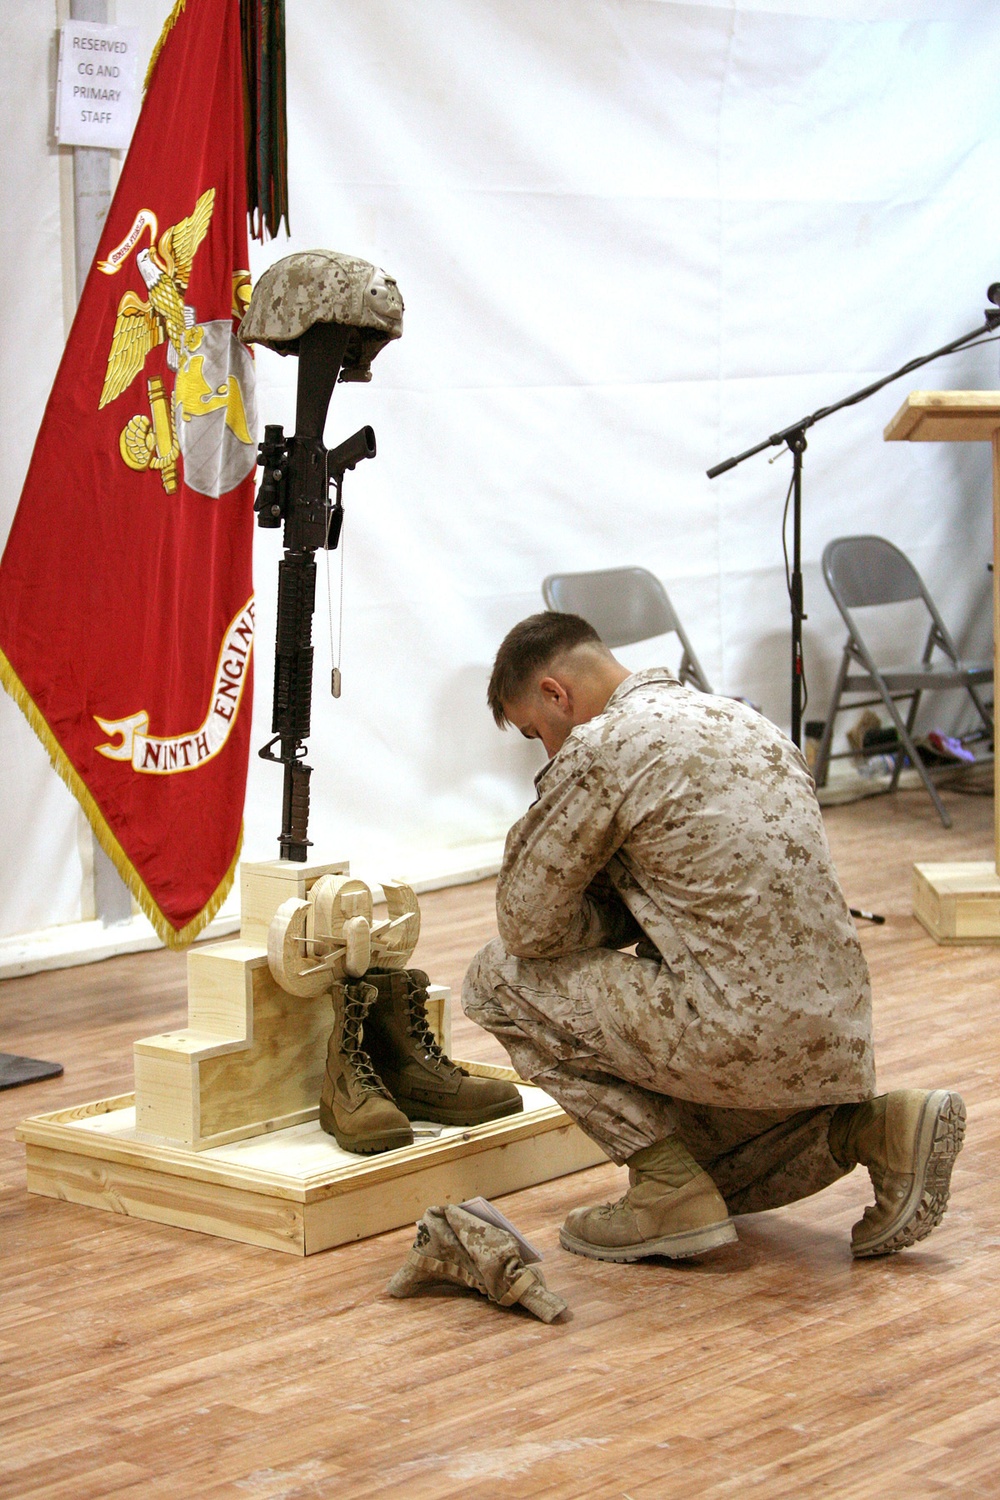 Fallen EOD Marine 'laid down his life for others'